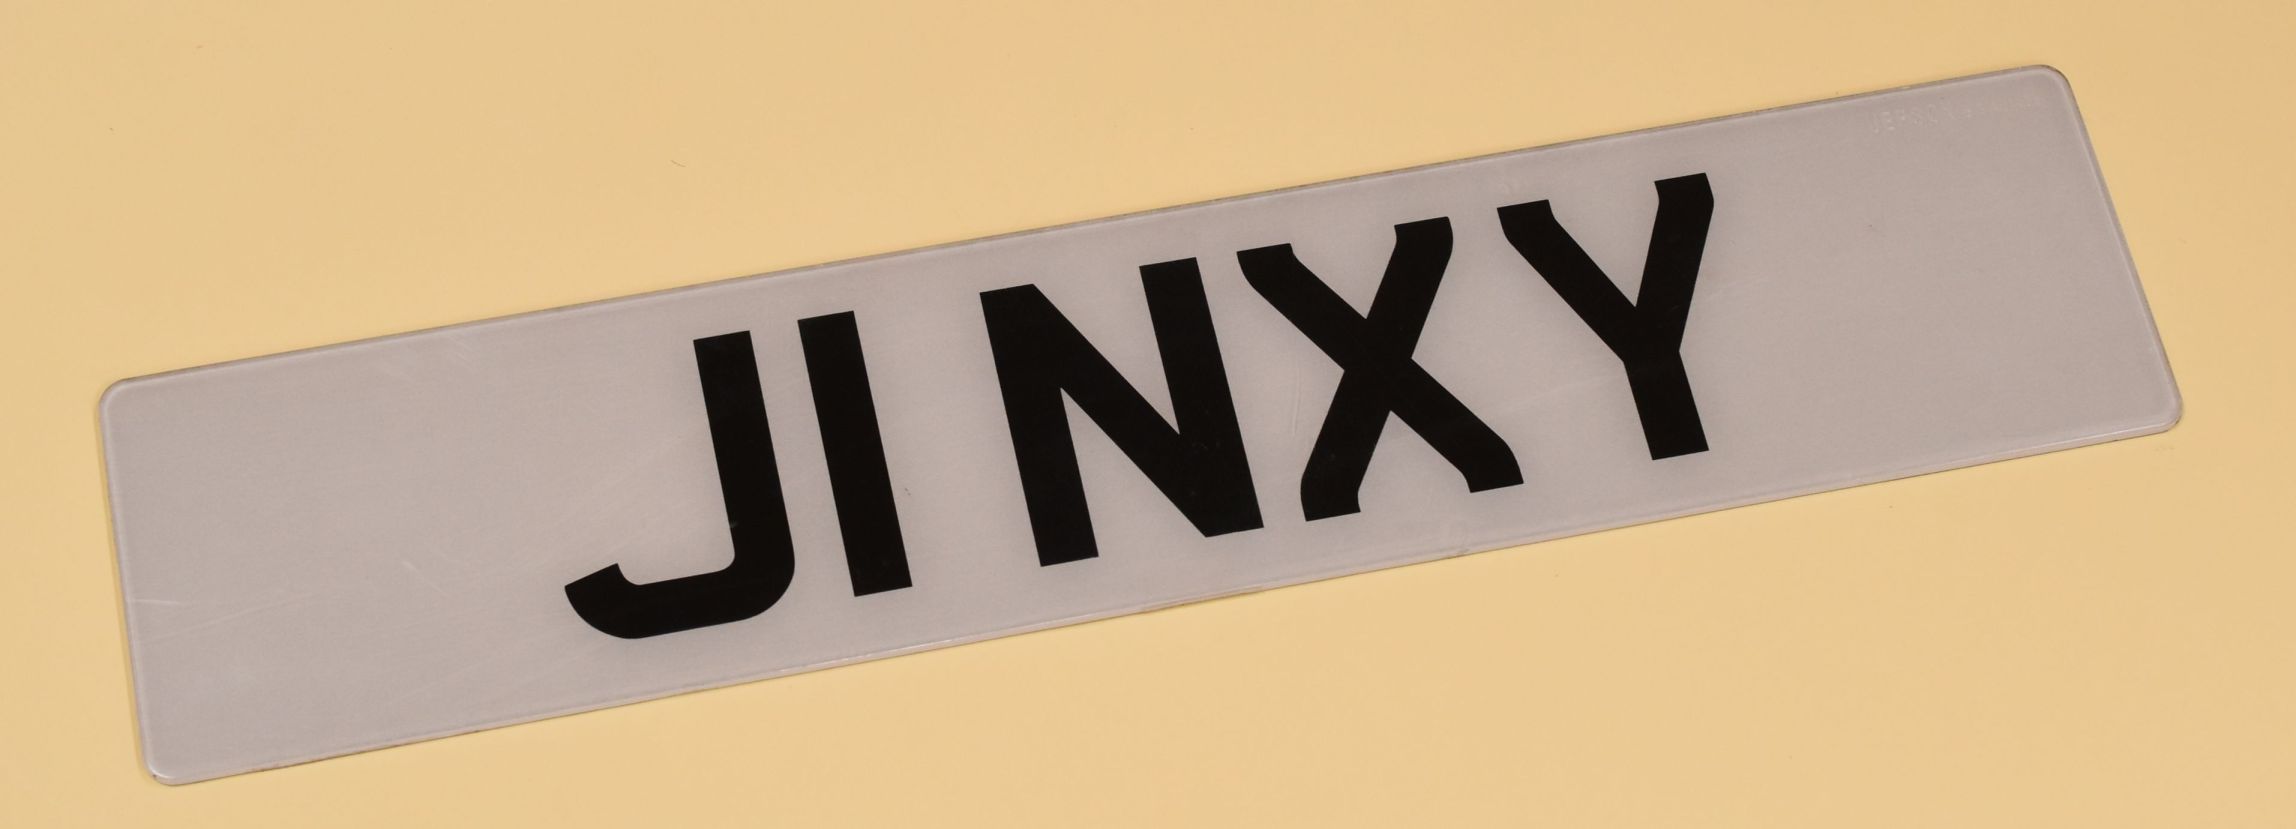 Car registration number plate - J1 NXY - with retention certificate